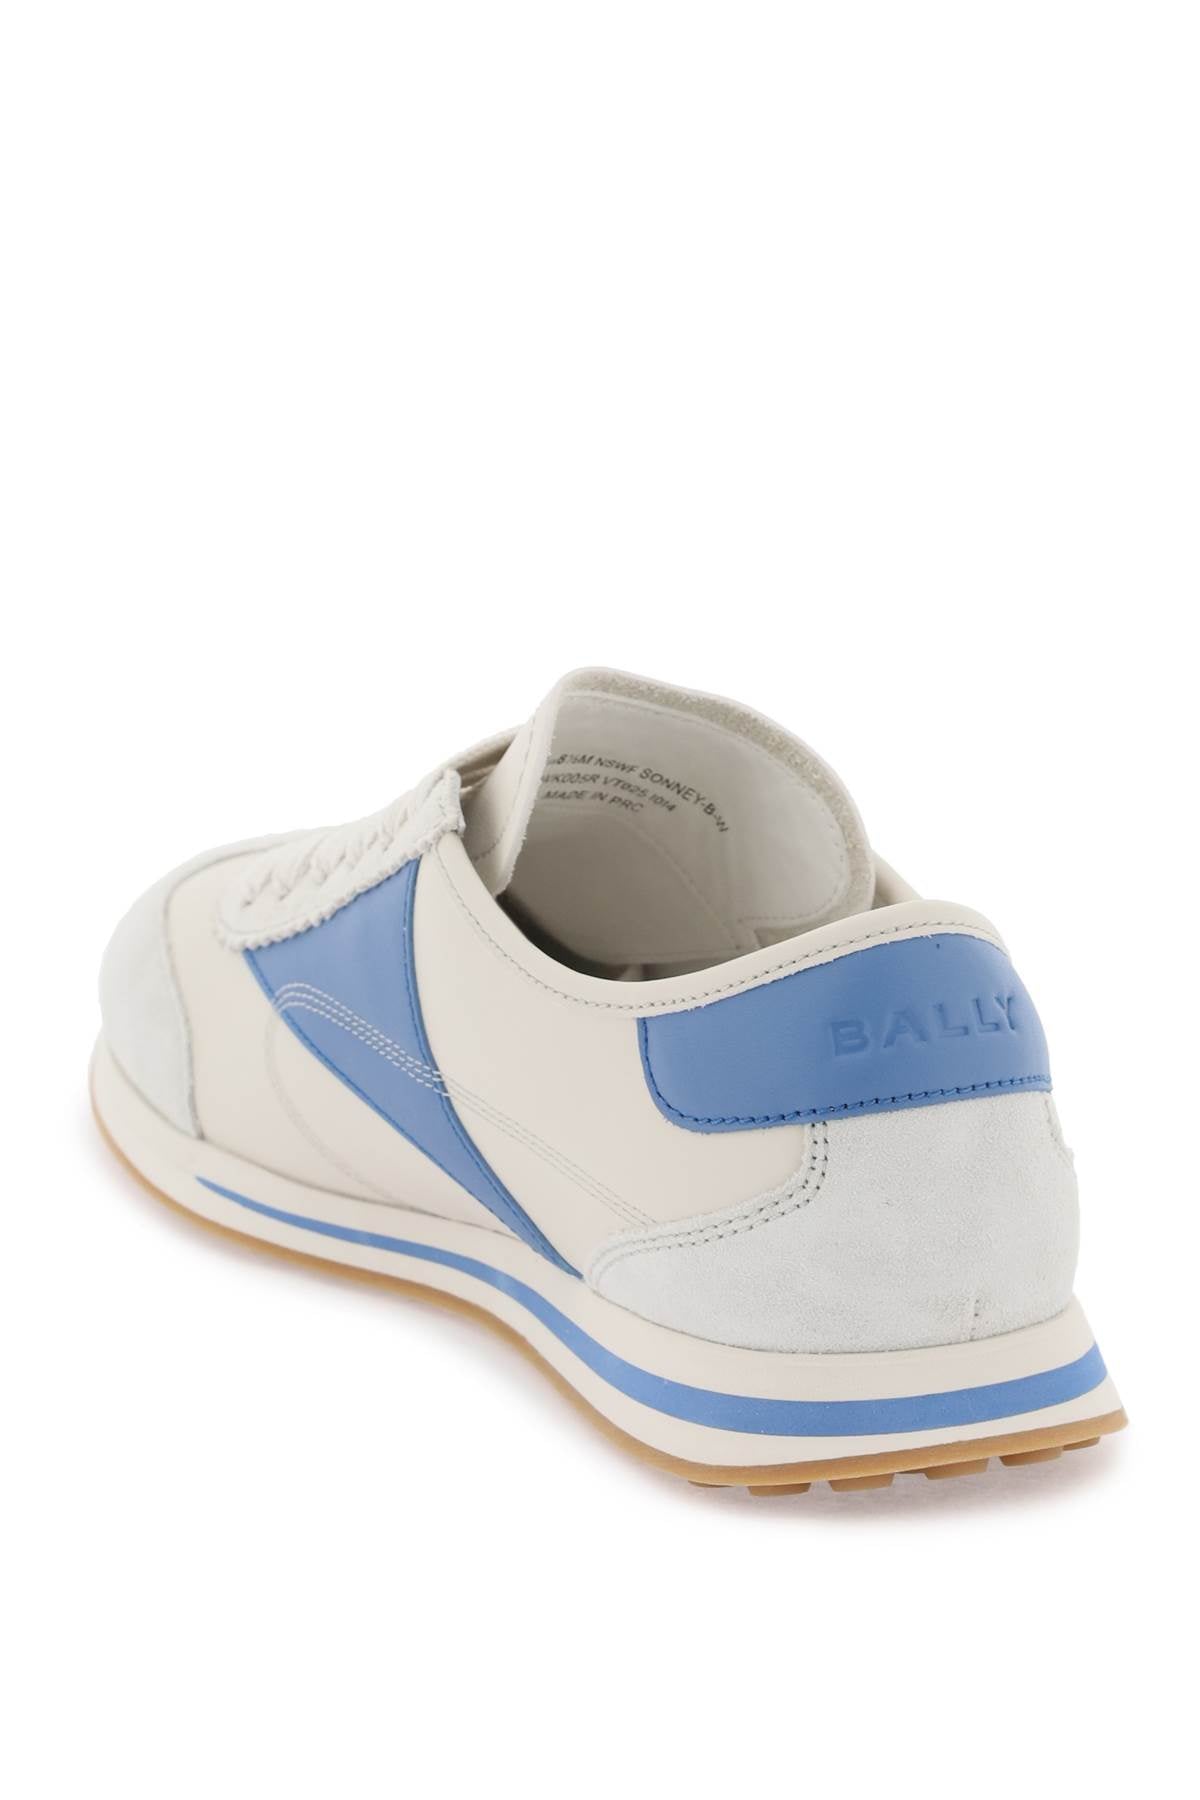 Bally leather sonney sneakers-2